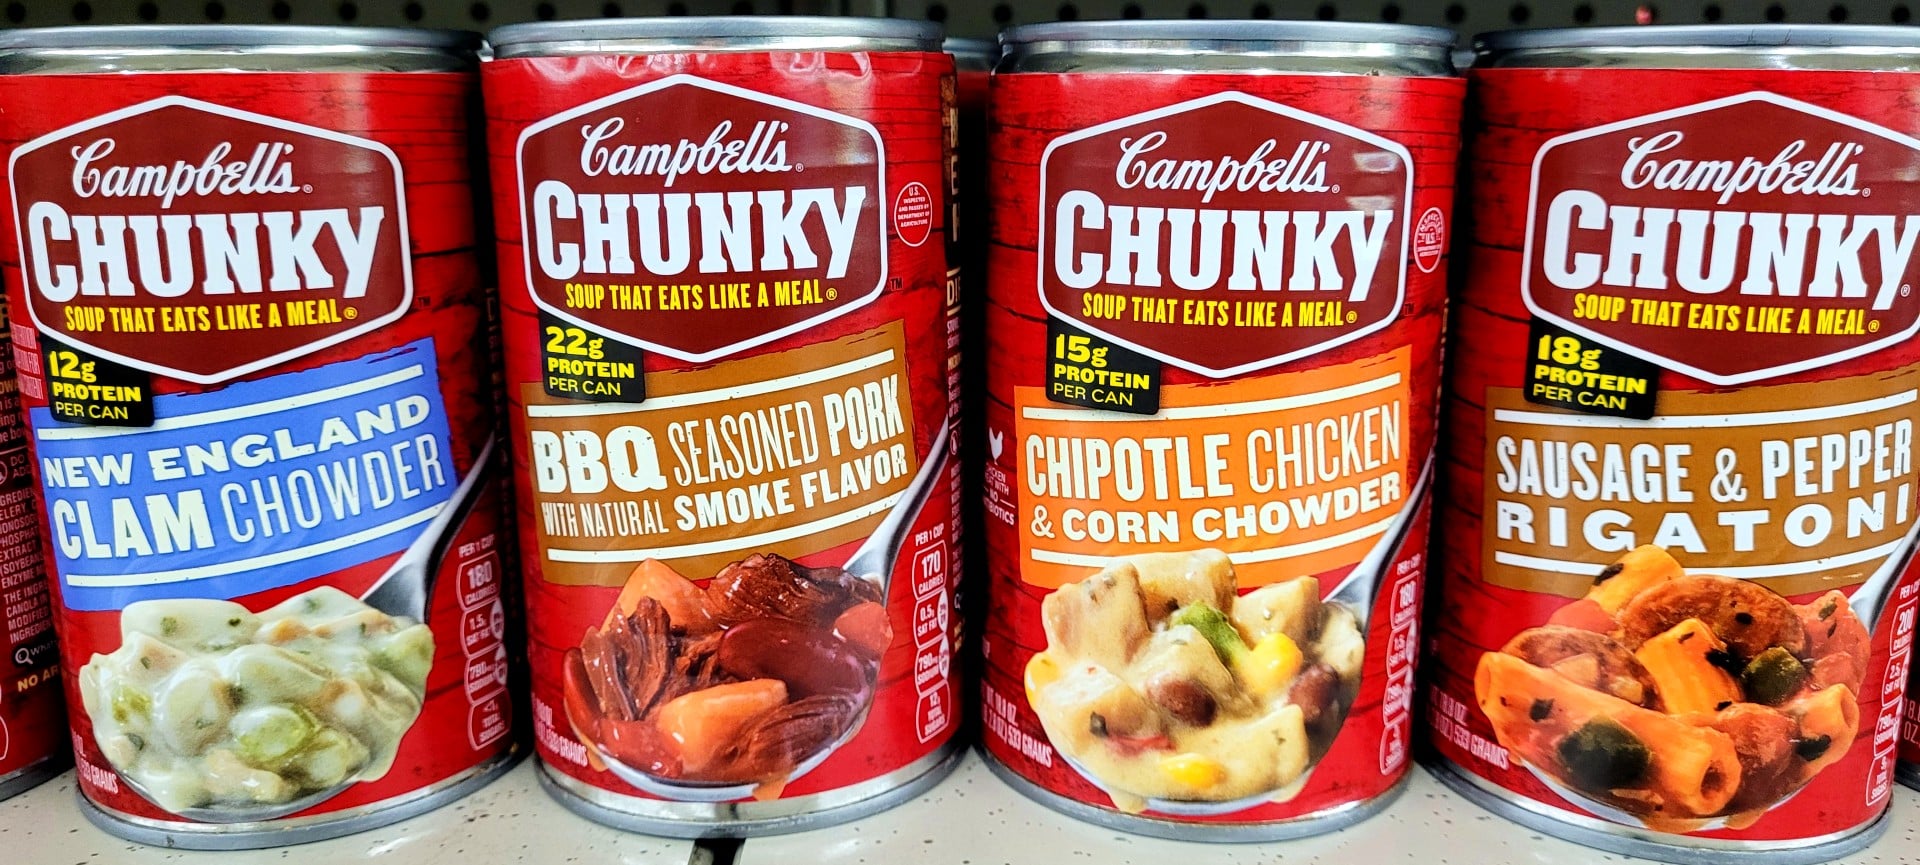 ) Discounted canned goods catalog